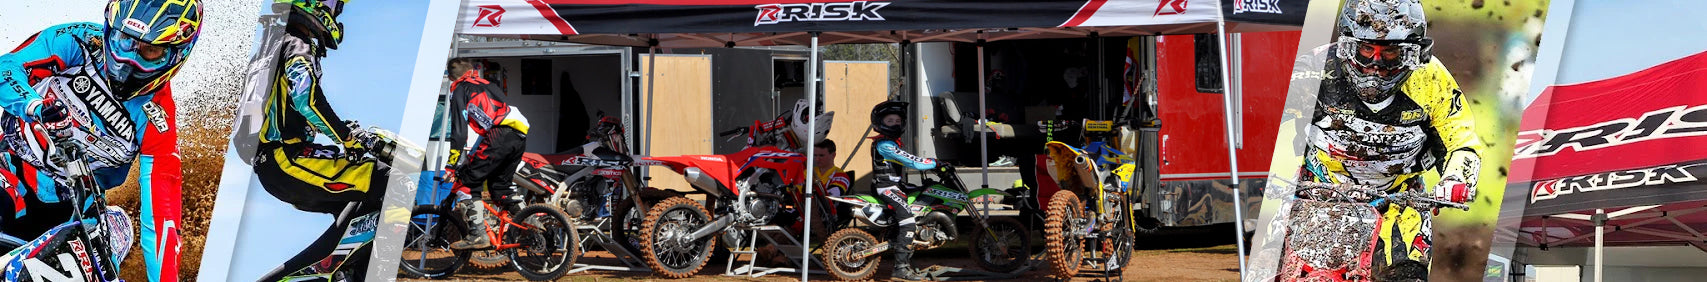 MX Pit Setup Collection Banner featuring a Risk Racing Pit tent with dirt bikes underneath